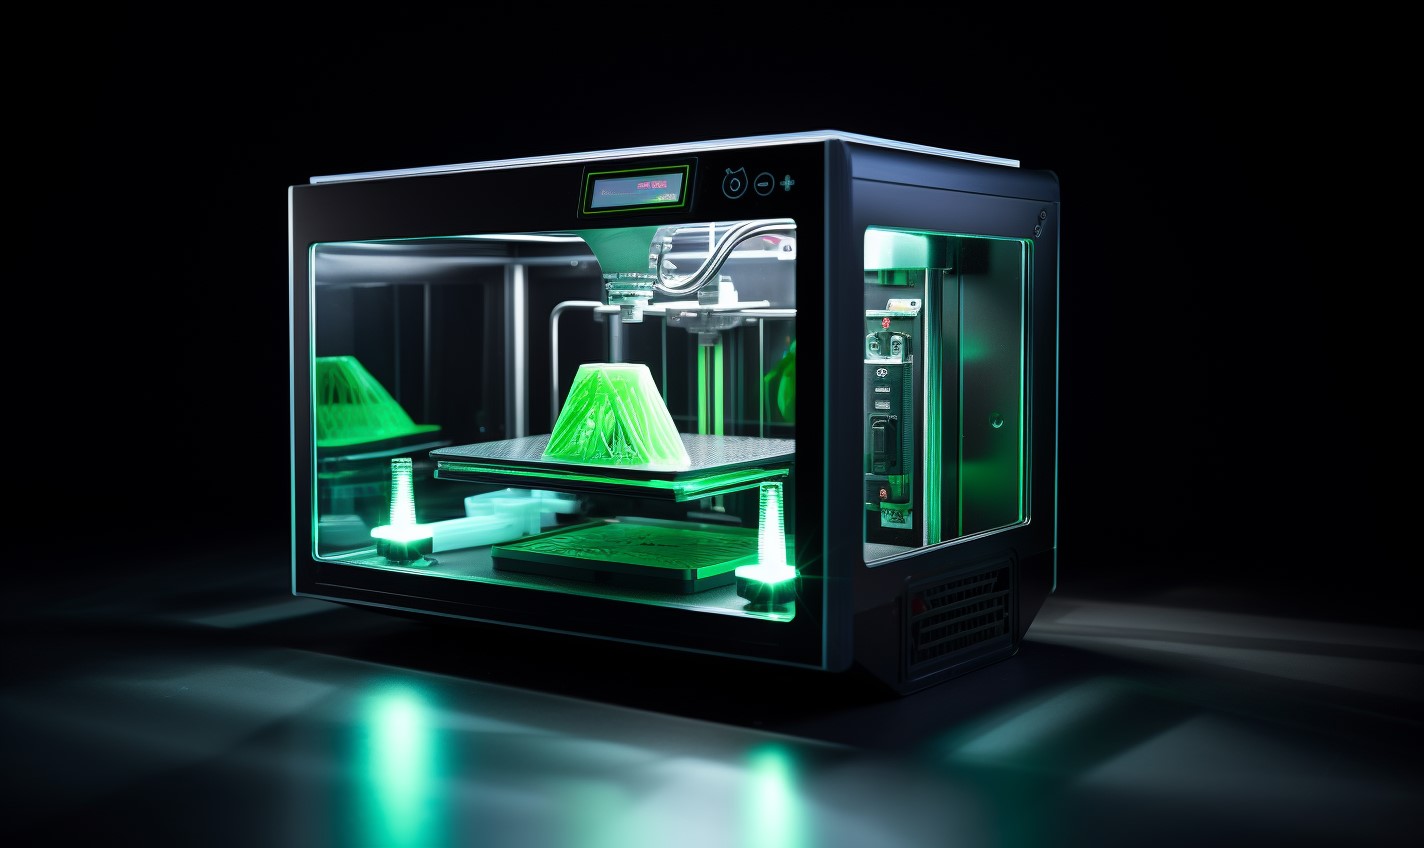 7 Industries Using 3D Printing in Strange and Unconventional Ways